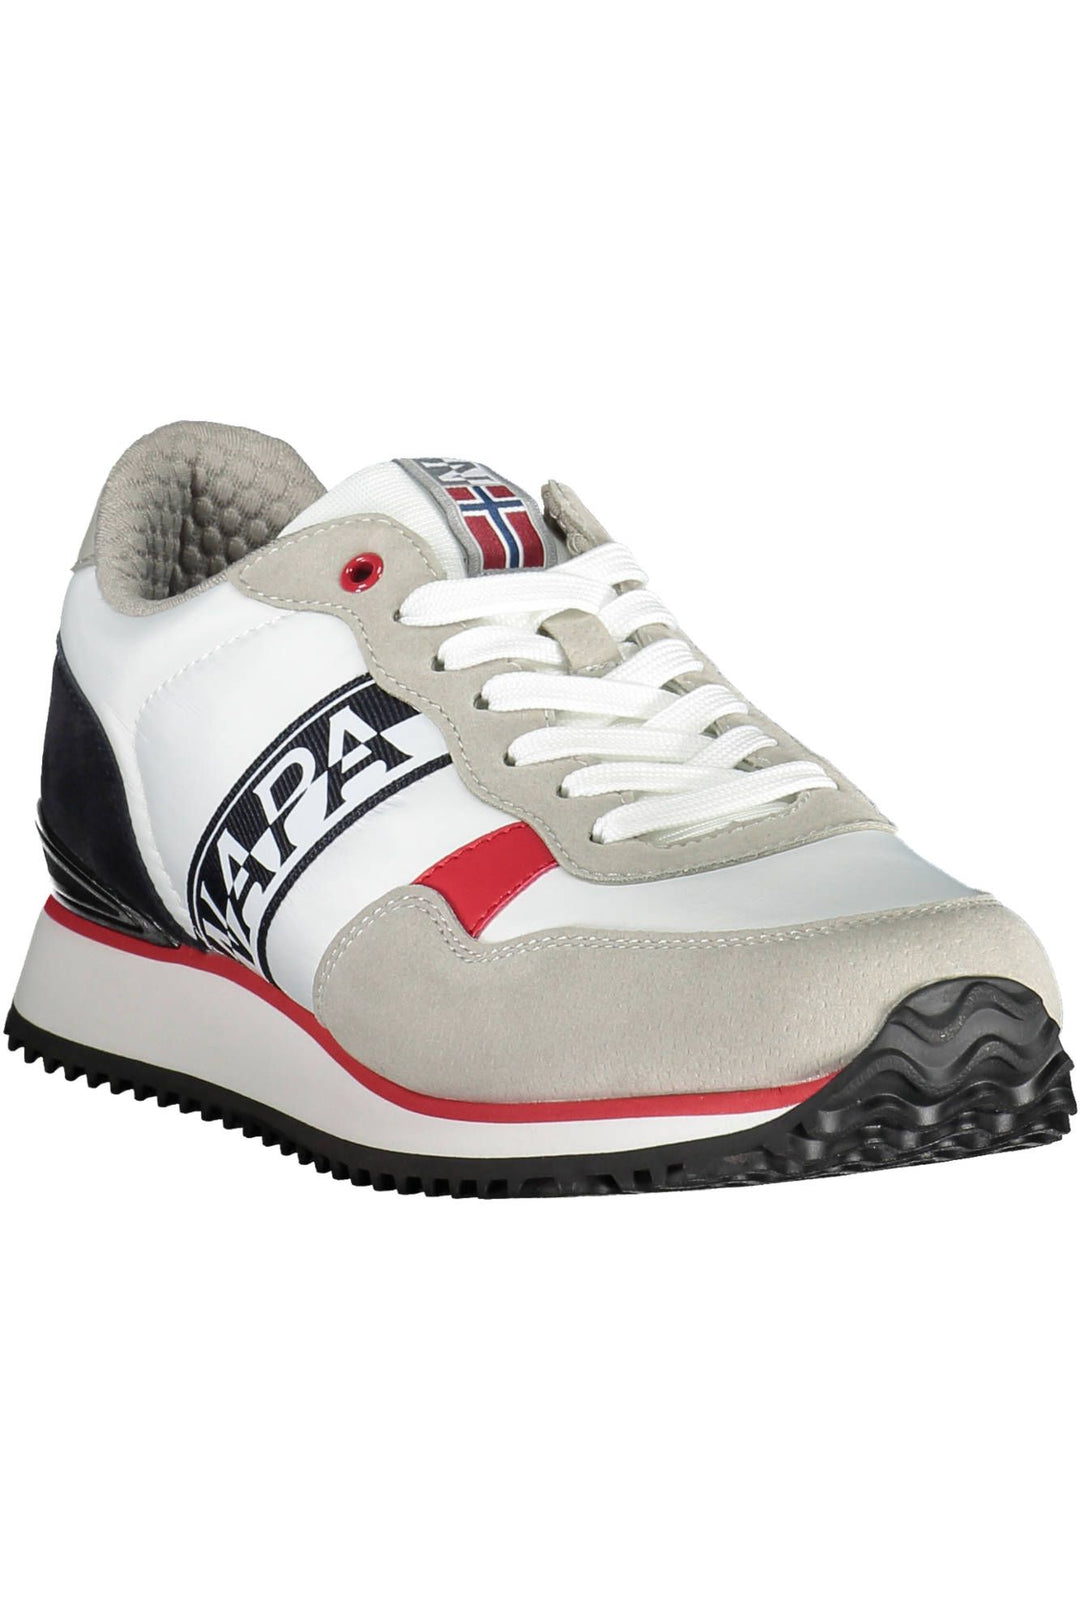 Napapijri Chic White Lace-Up Sneakers with Logo Detail